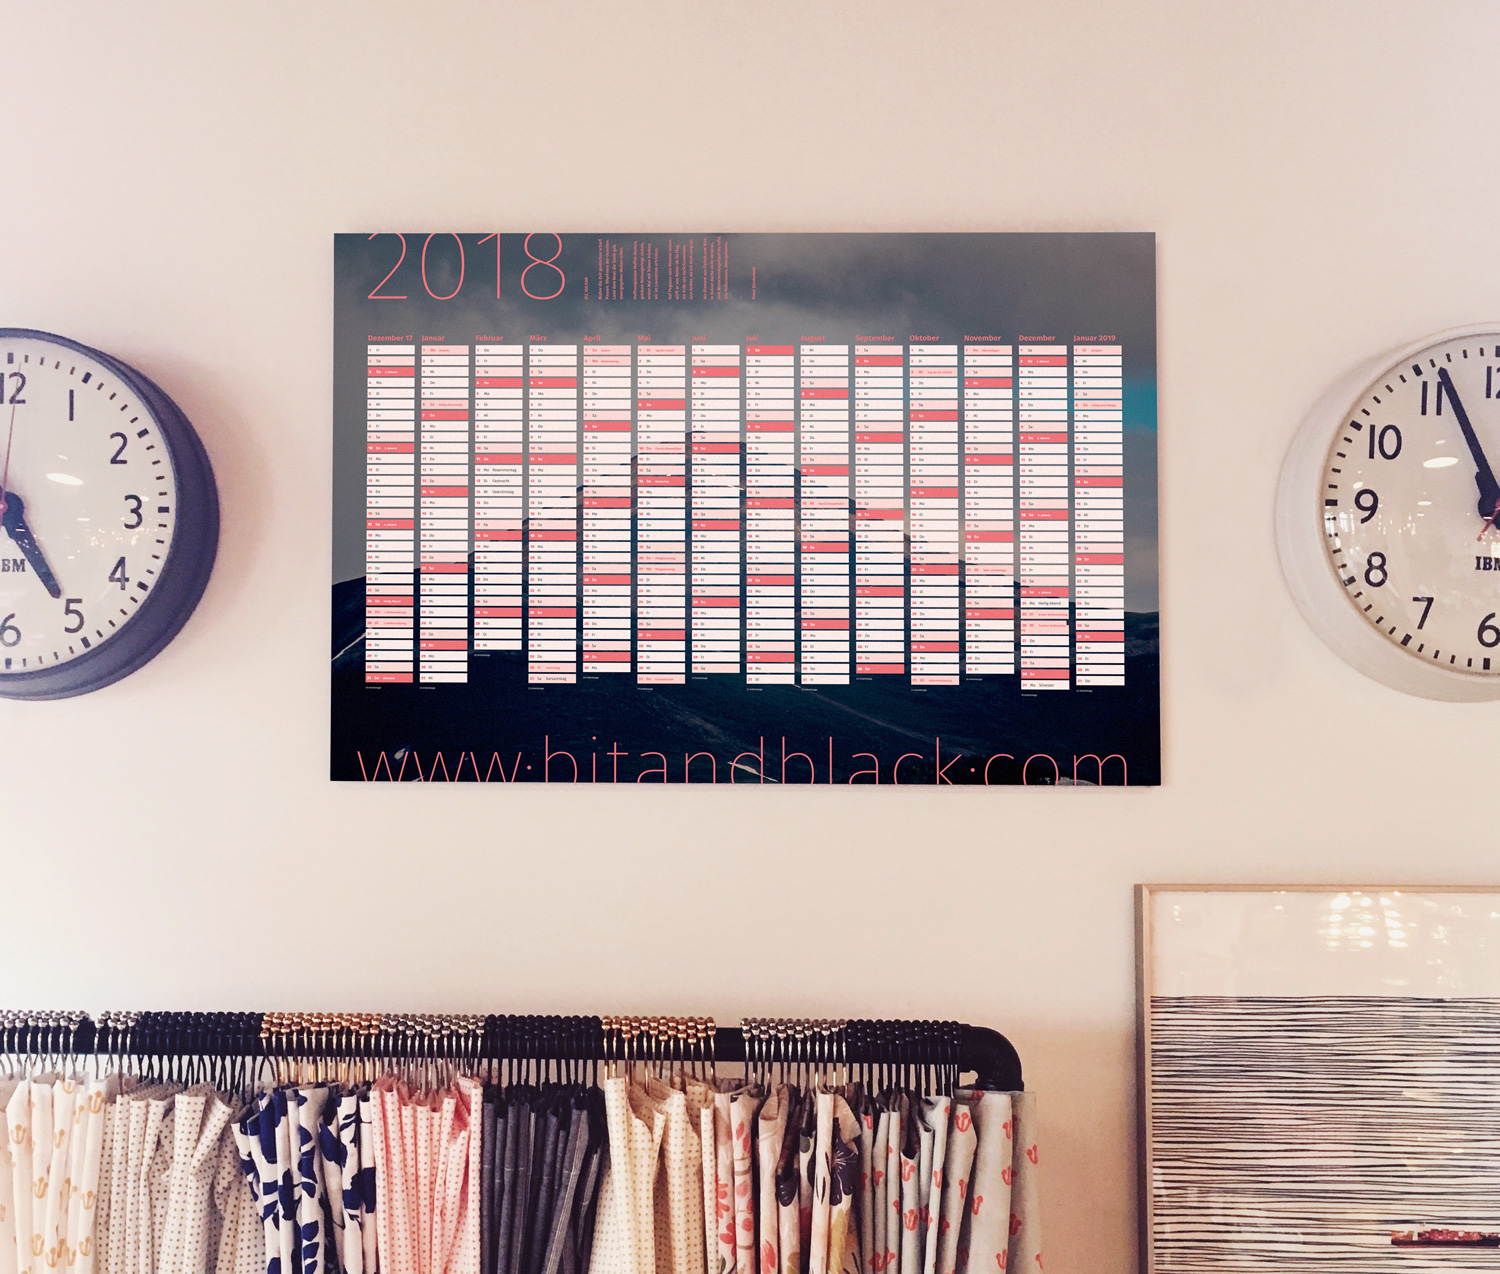 A wall planner from Calidario